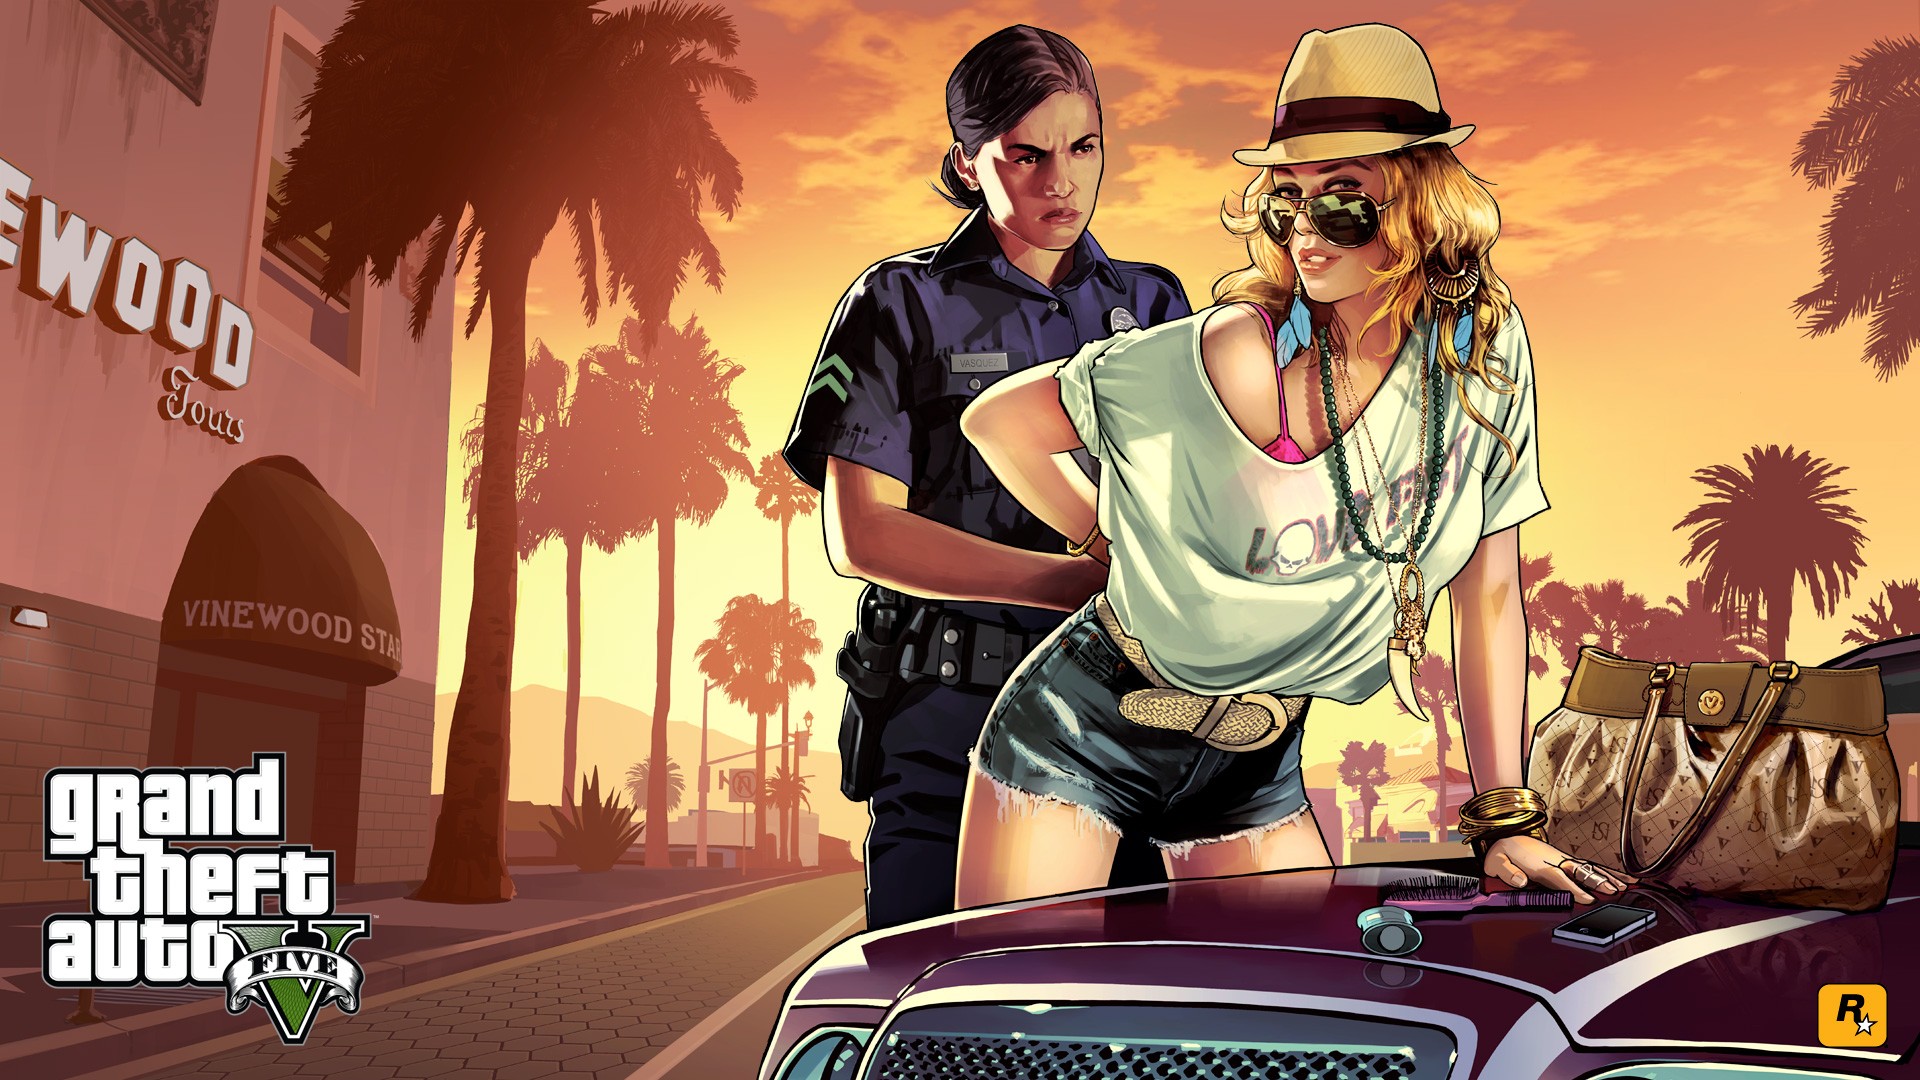 General 1920x1080 Grand Theft Auto V Rockstar Games video games police women hat video game art video game girls women with shades two women PC gaming